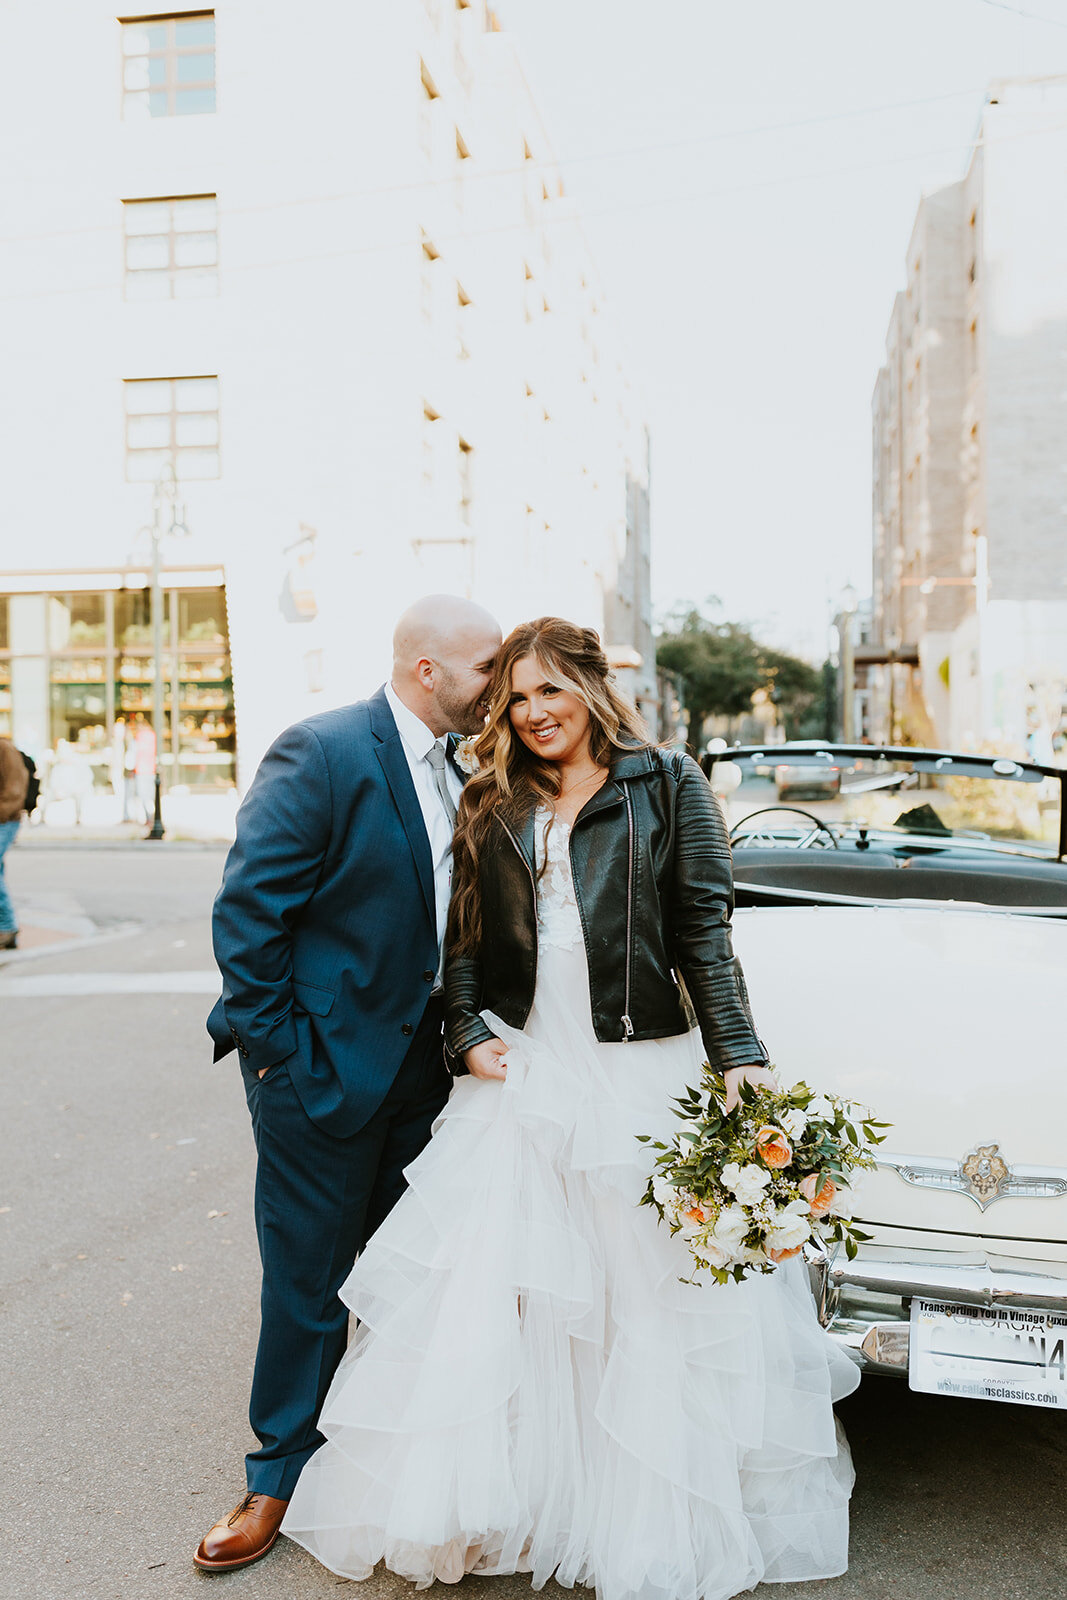 ivory-and-beau-wedding-and-florals-jaclyn-and-ross-wedding-coordinator-event-coordinator-savannah-florist-wedding-florist-wedding-flowers-wedding-florals-wedding-planning-Balthazor_WHV-241.jpg